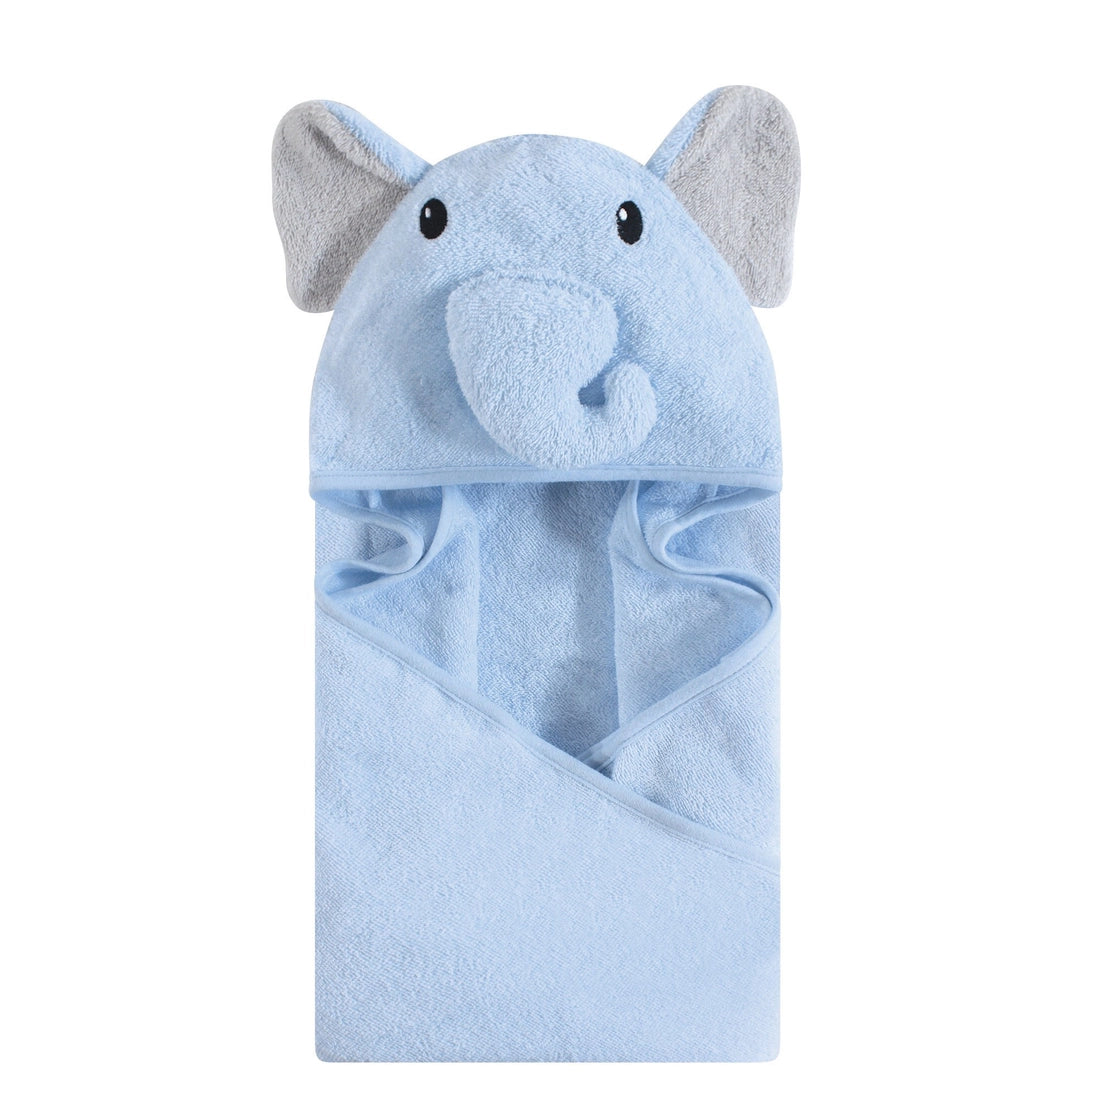 Personalized Baby Cotton Animal Face Hooded Towel, Light Blue